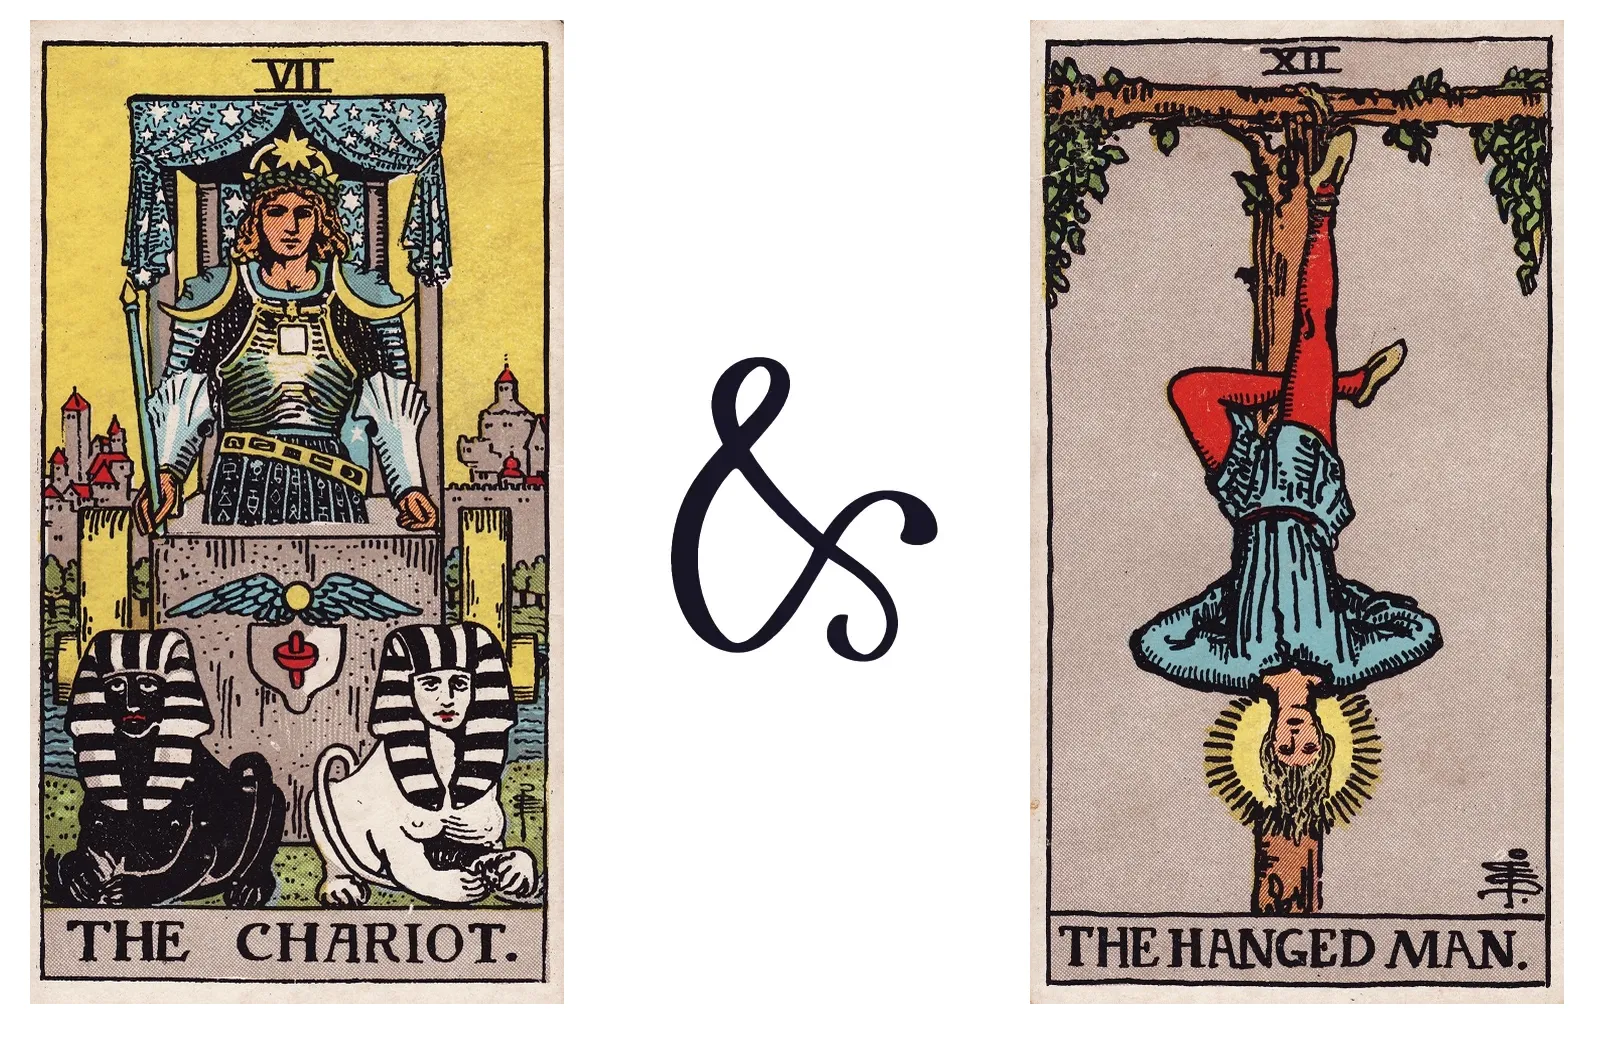 The Chariot and The Hanged Man